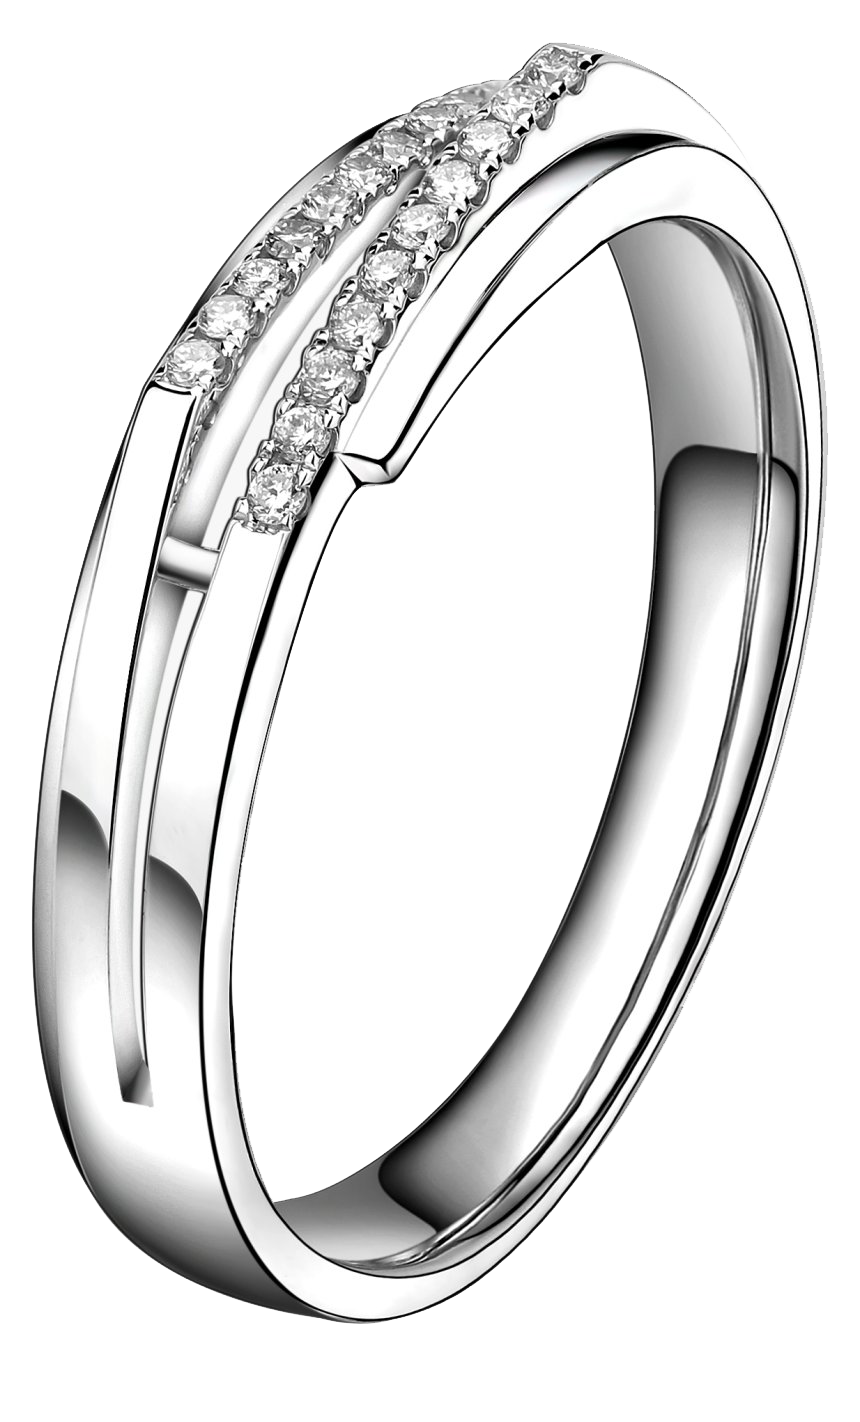 Wedding Silver Ring PNG Image Background